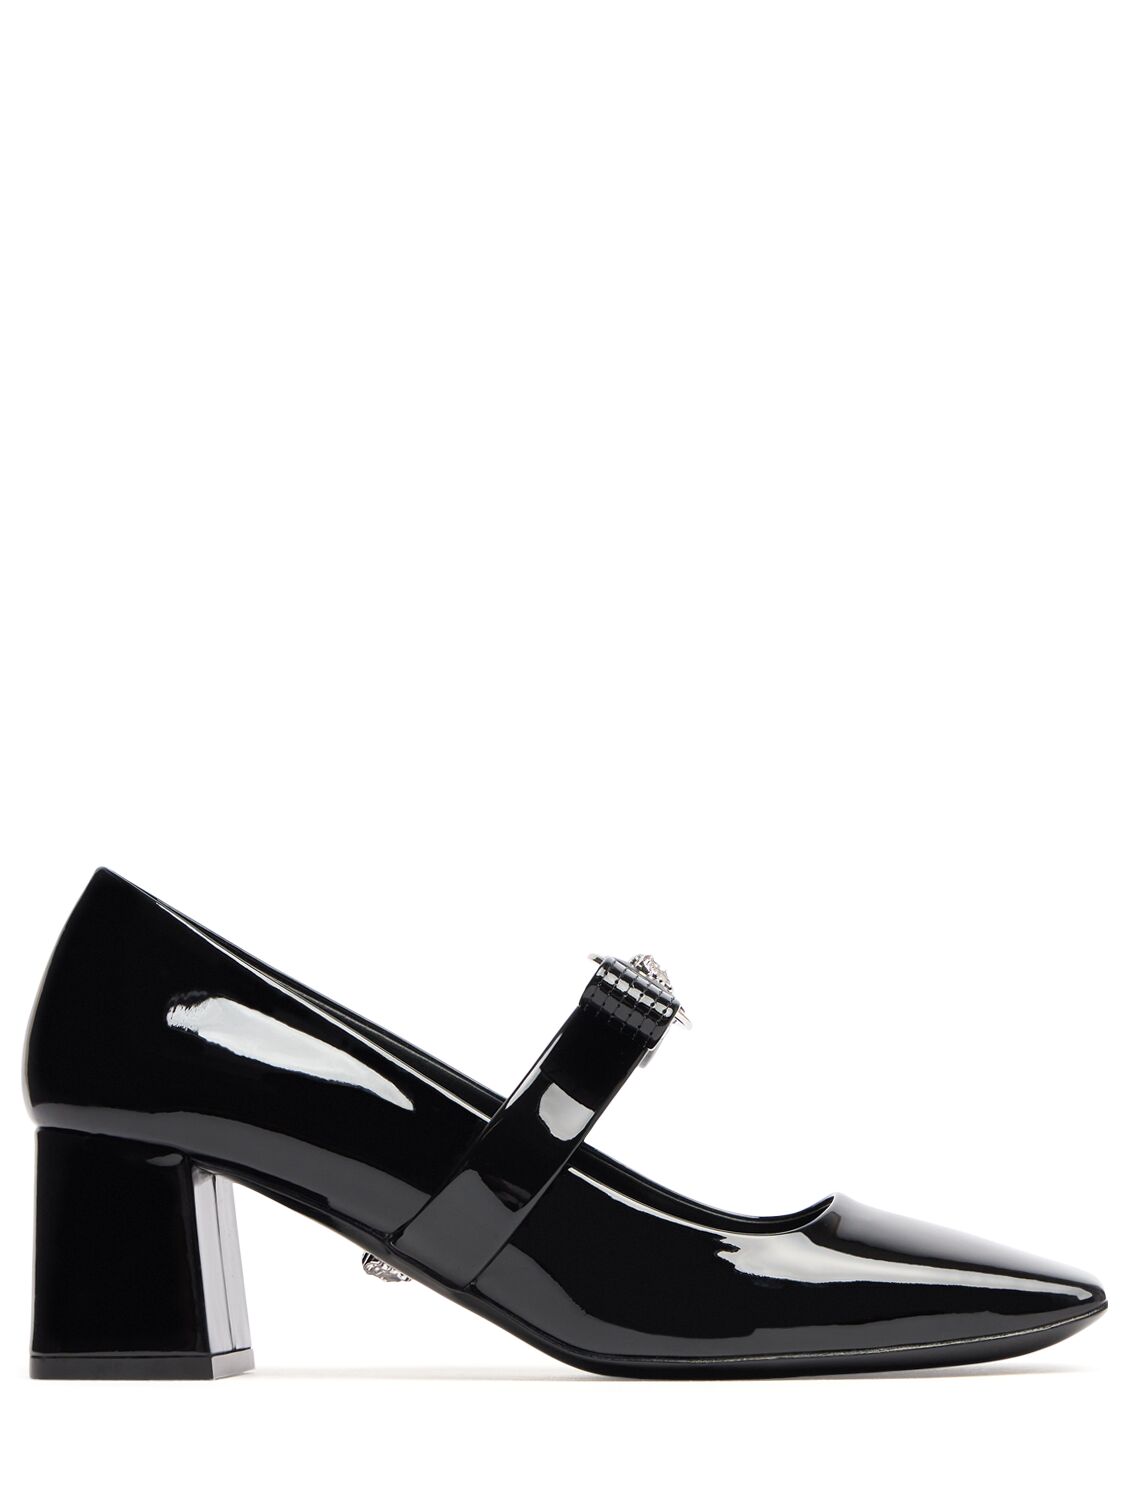 Versace 55mm Patent Leather Pumps In Black